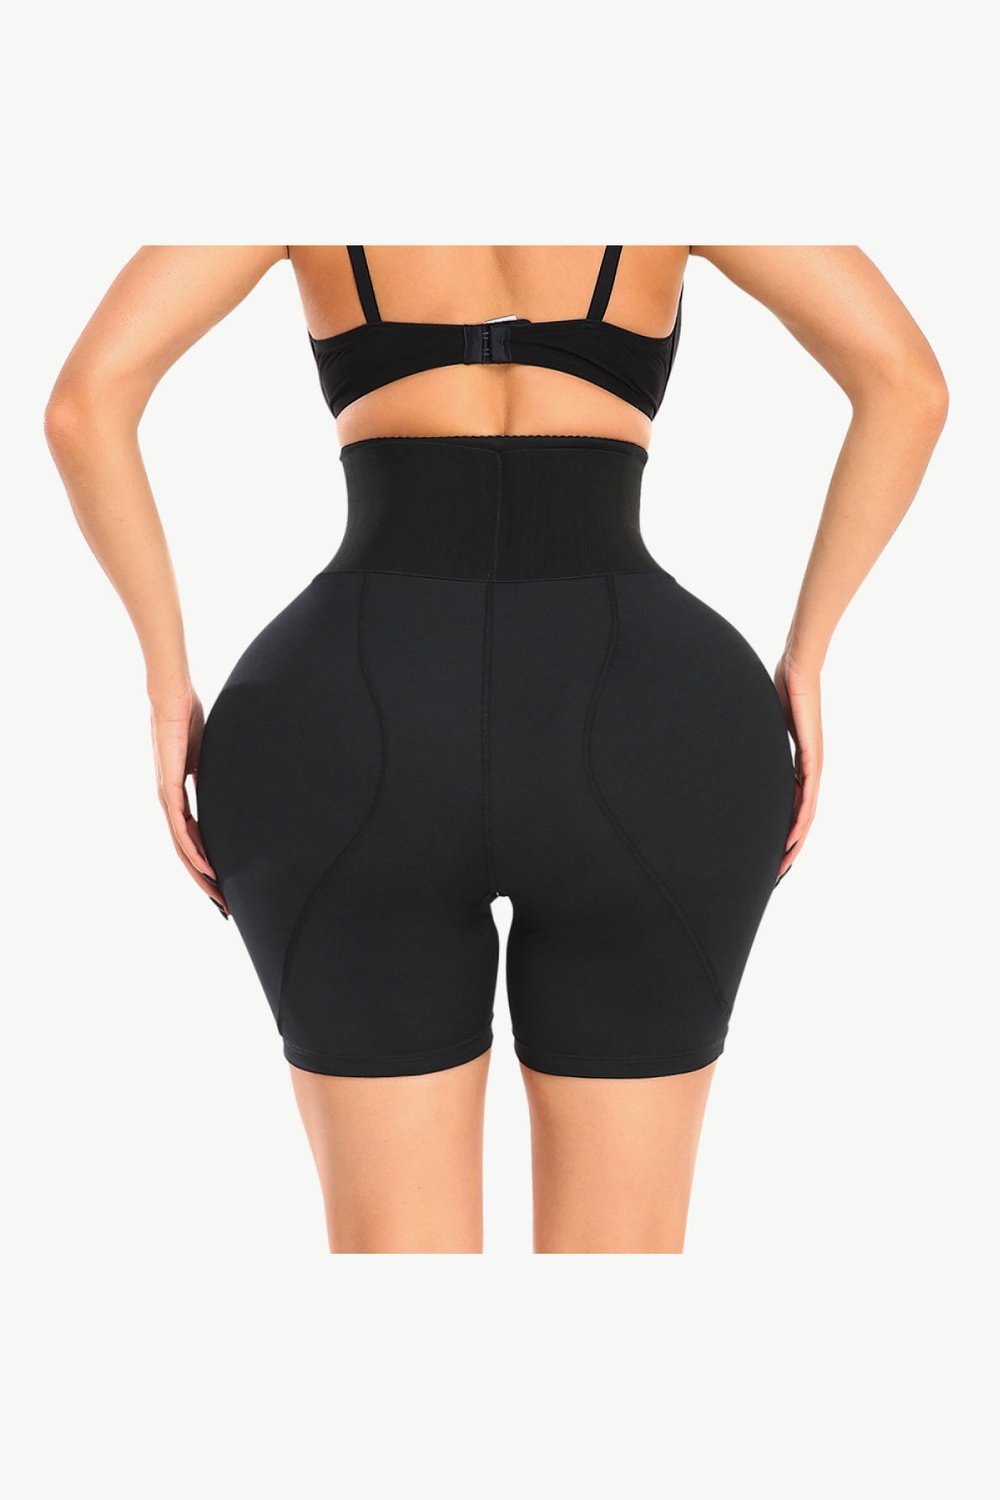 Full Size Removable Pad Shaping Shorts - Shapewear - FITGGINS